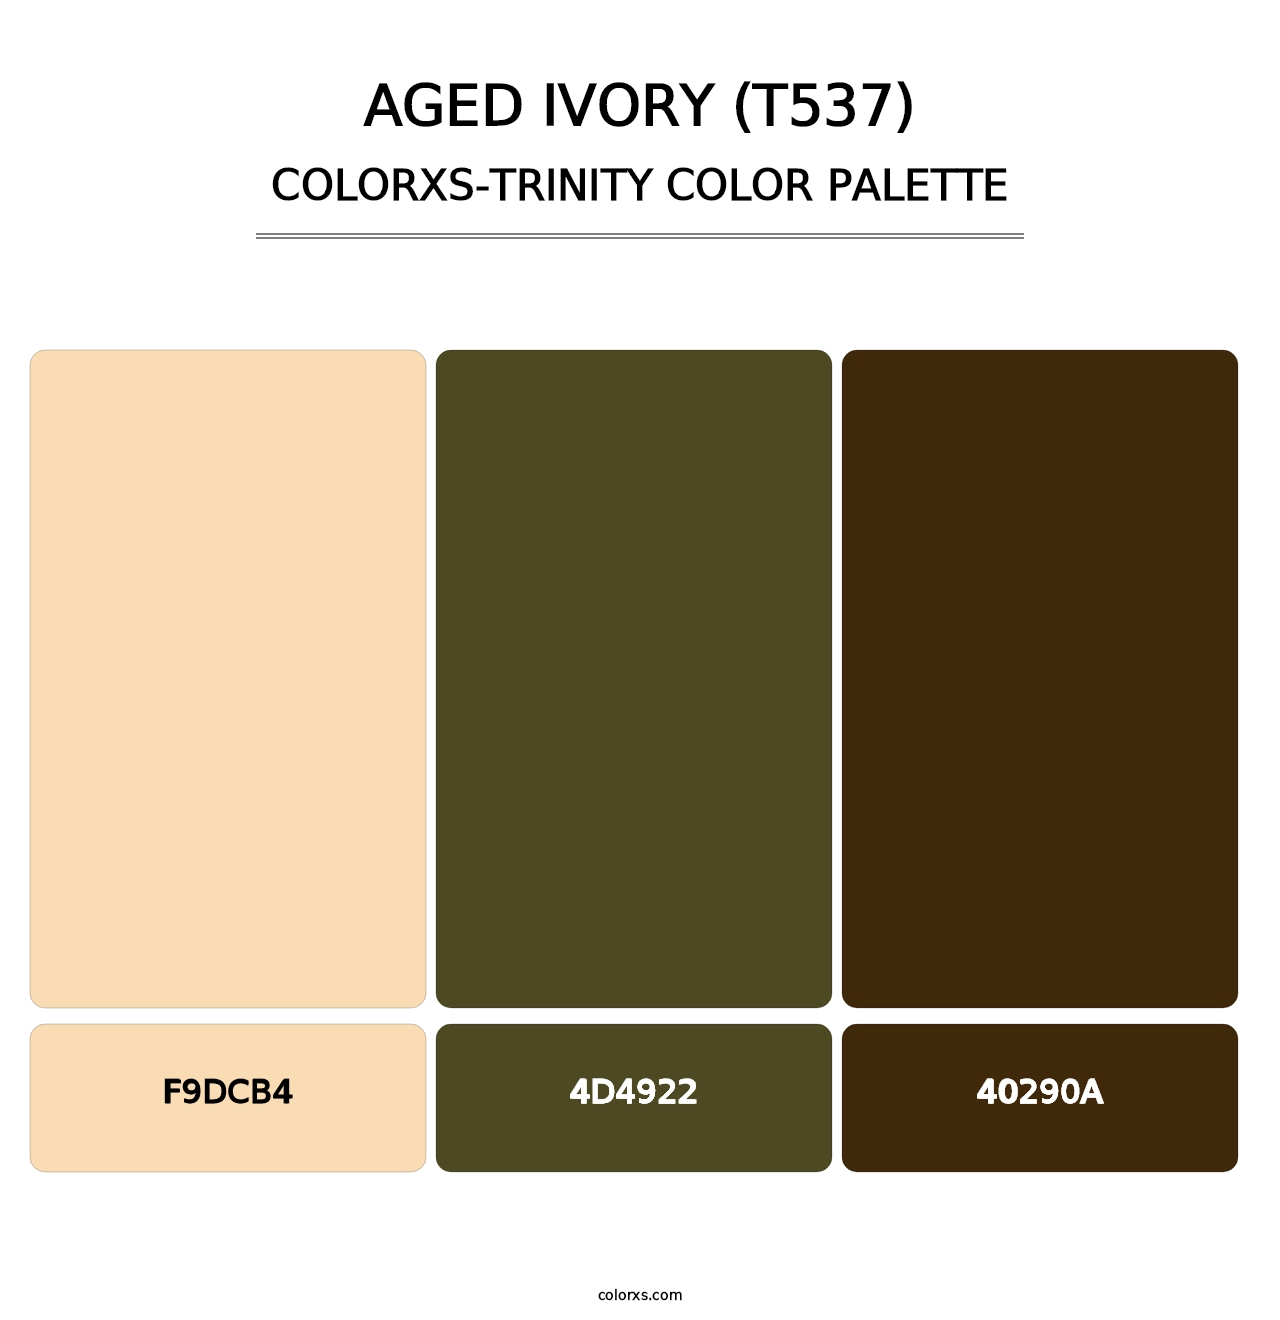 Aged Ivory (T537) - Colorxs Trinity Palette